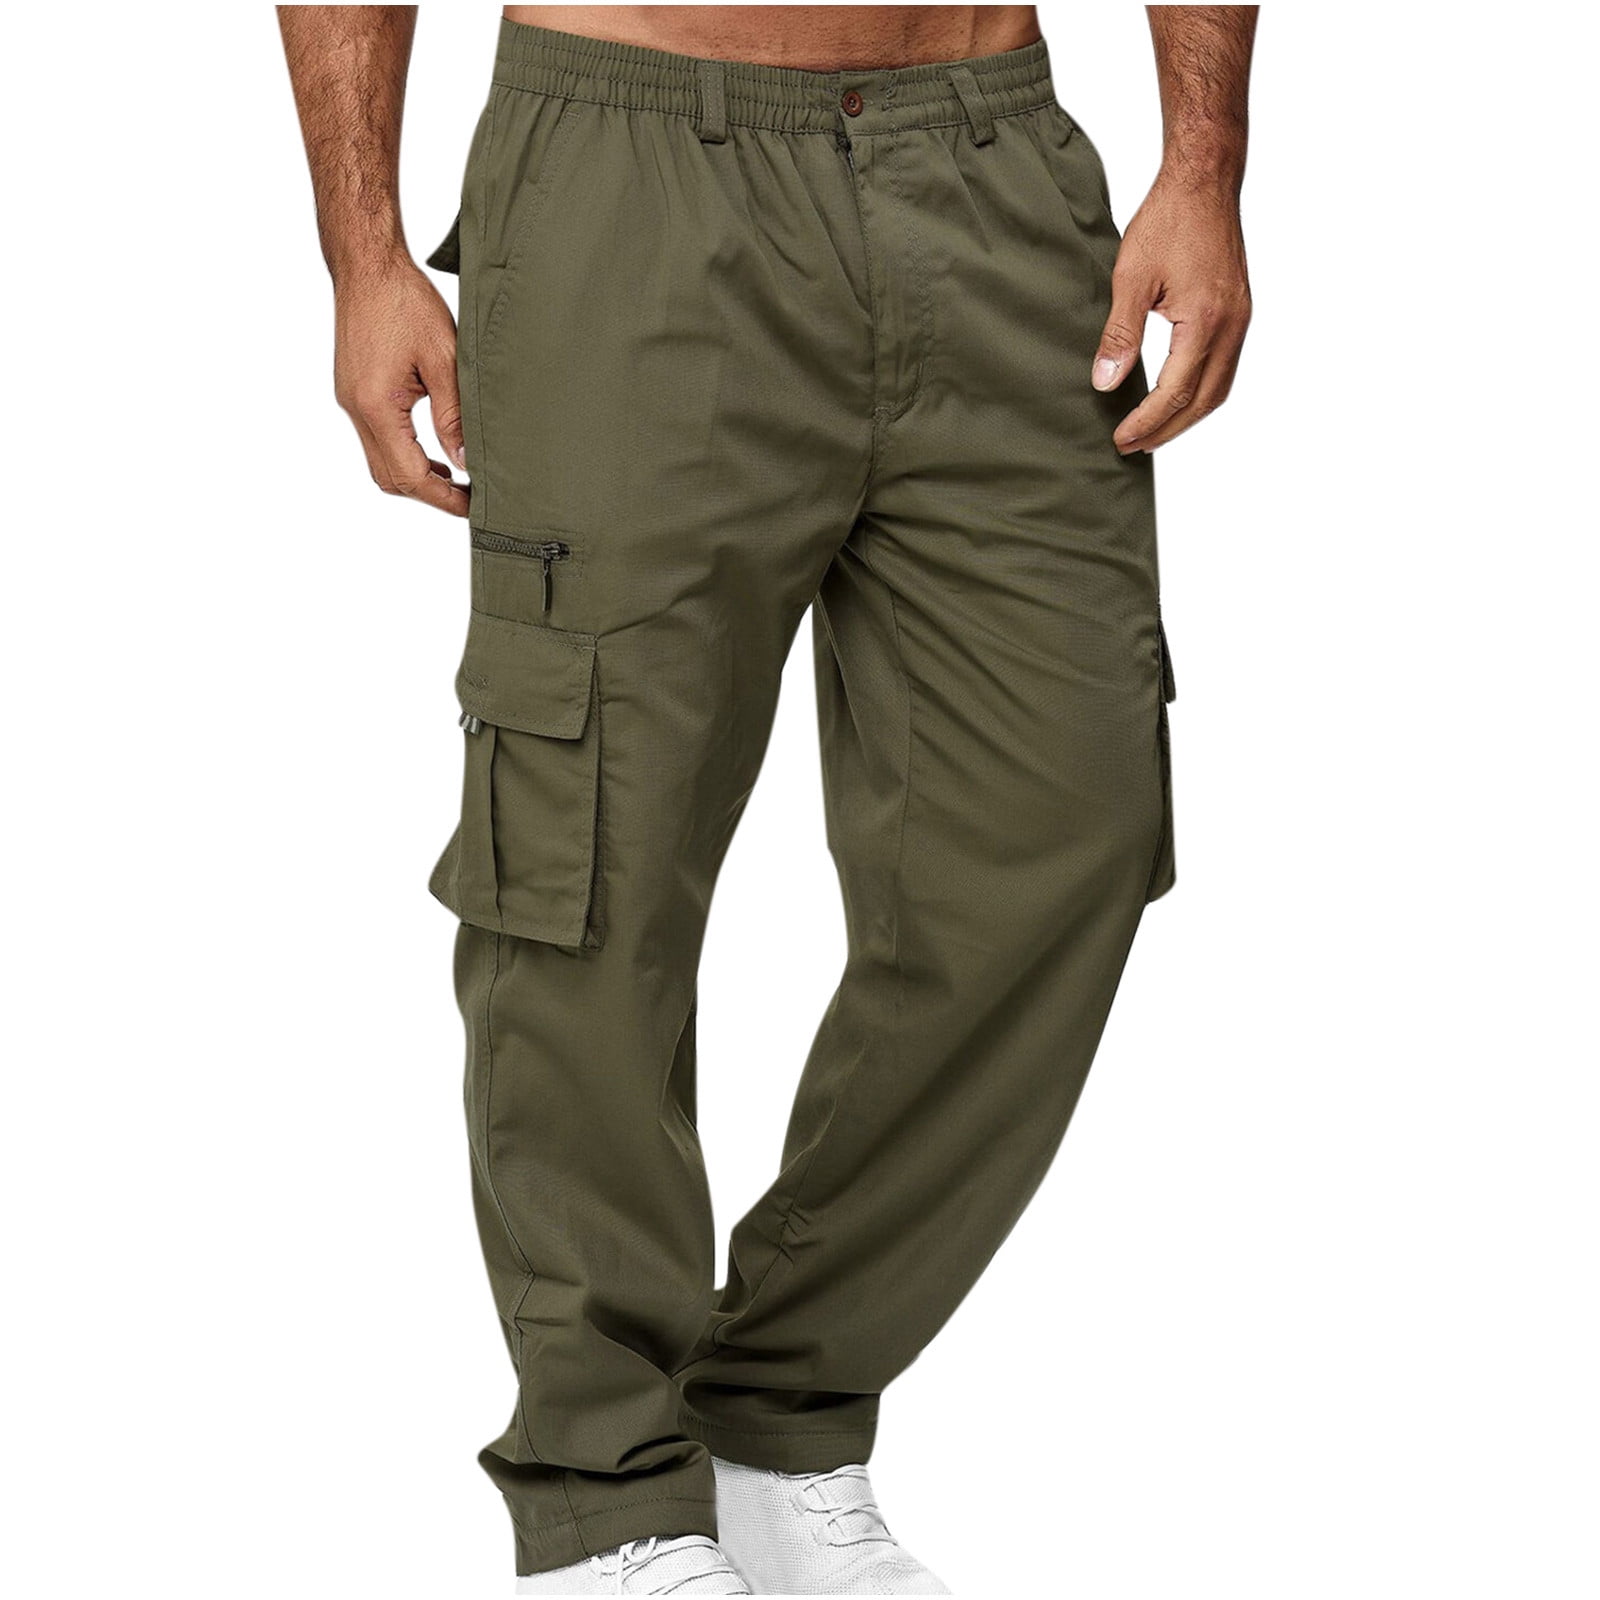 Aoochasliy Mens Jeans Clearance Reduced Price Men Solid Casual Multiple  Pockets Outdoor Straight Type Fitness Pants Cargo Pants Trousers Deals of  the Day - Walmart.com